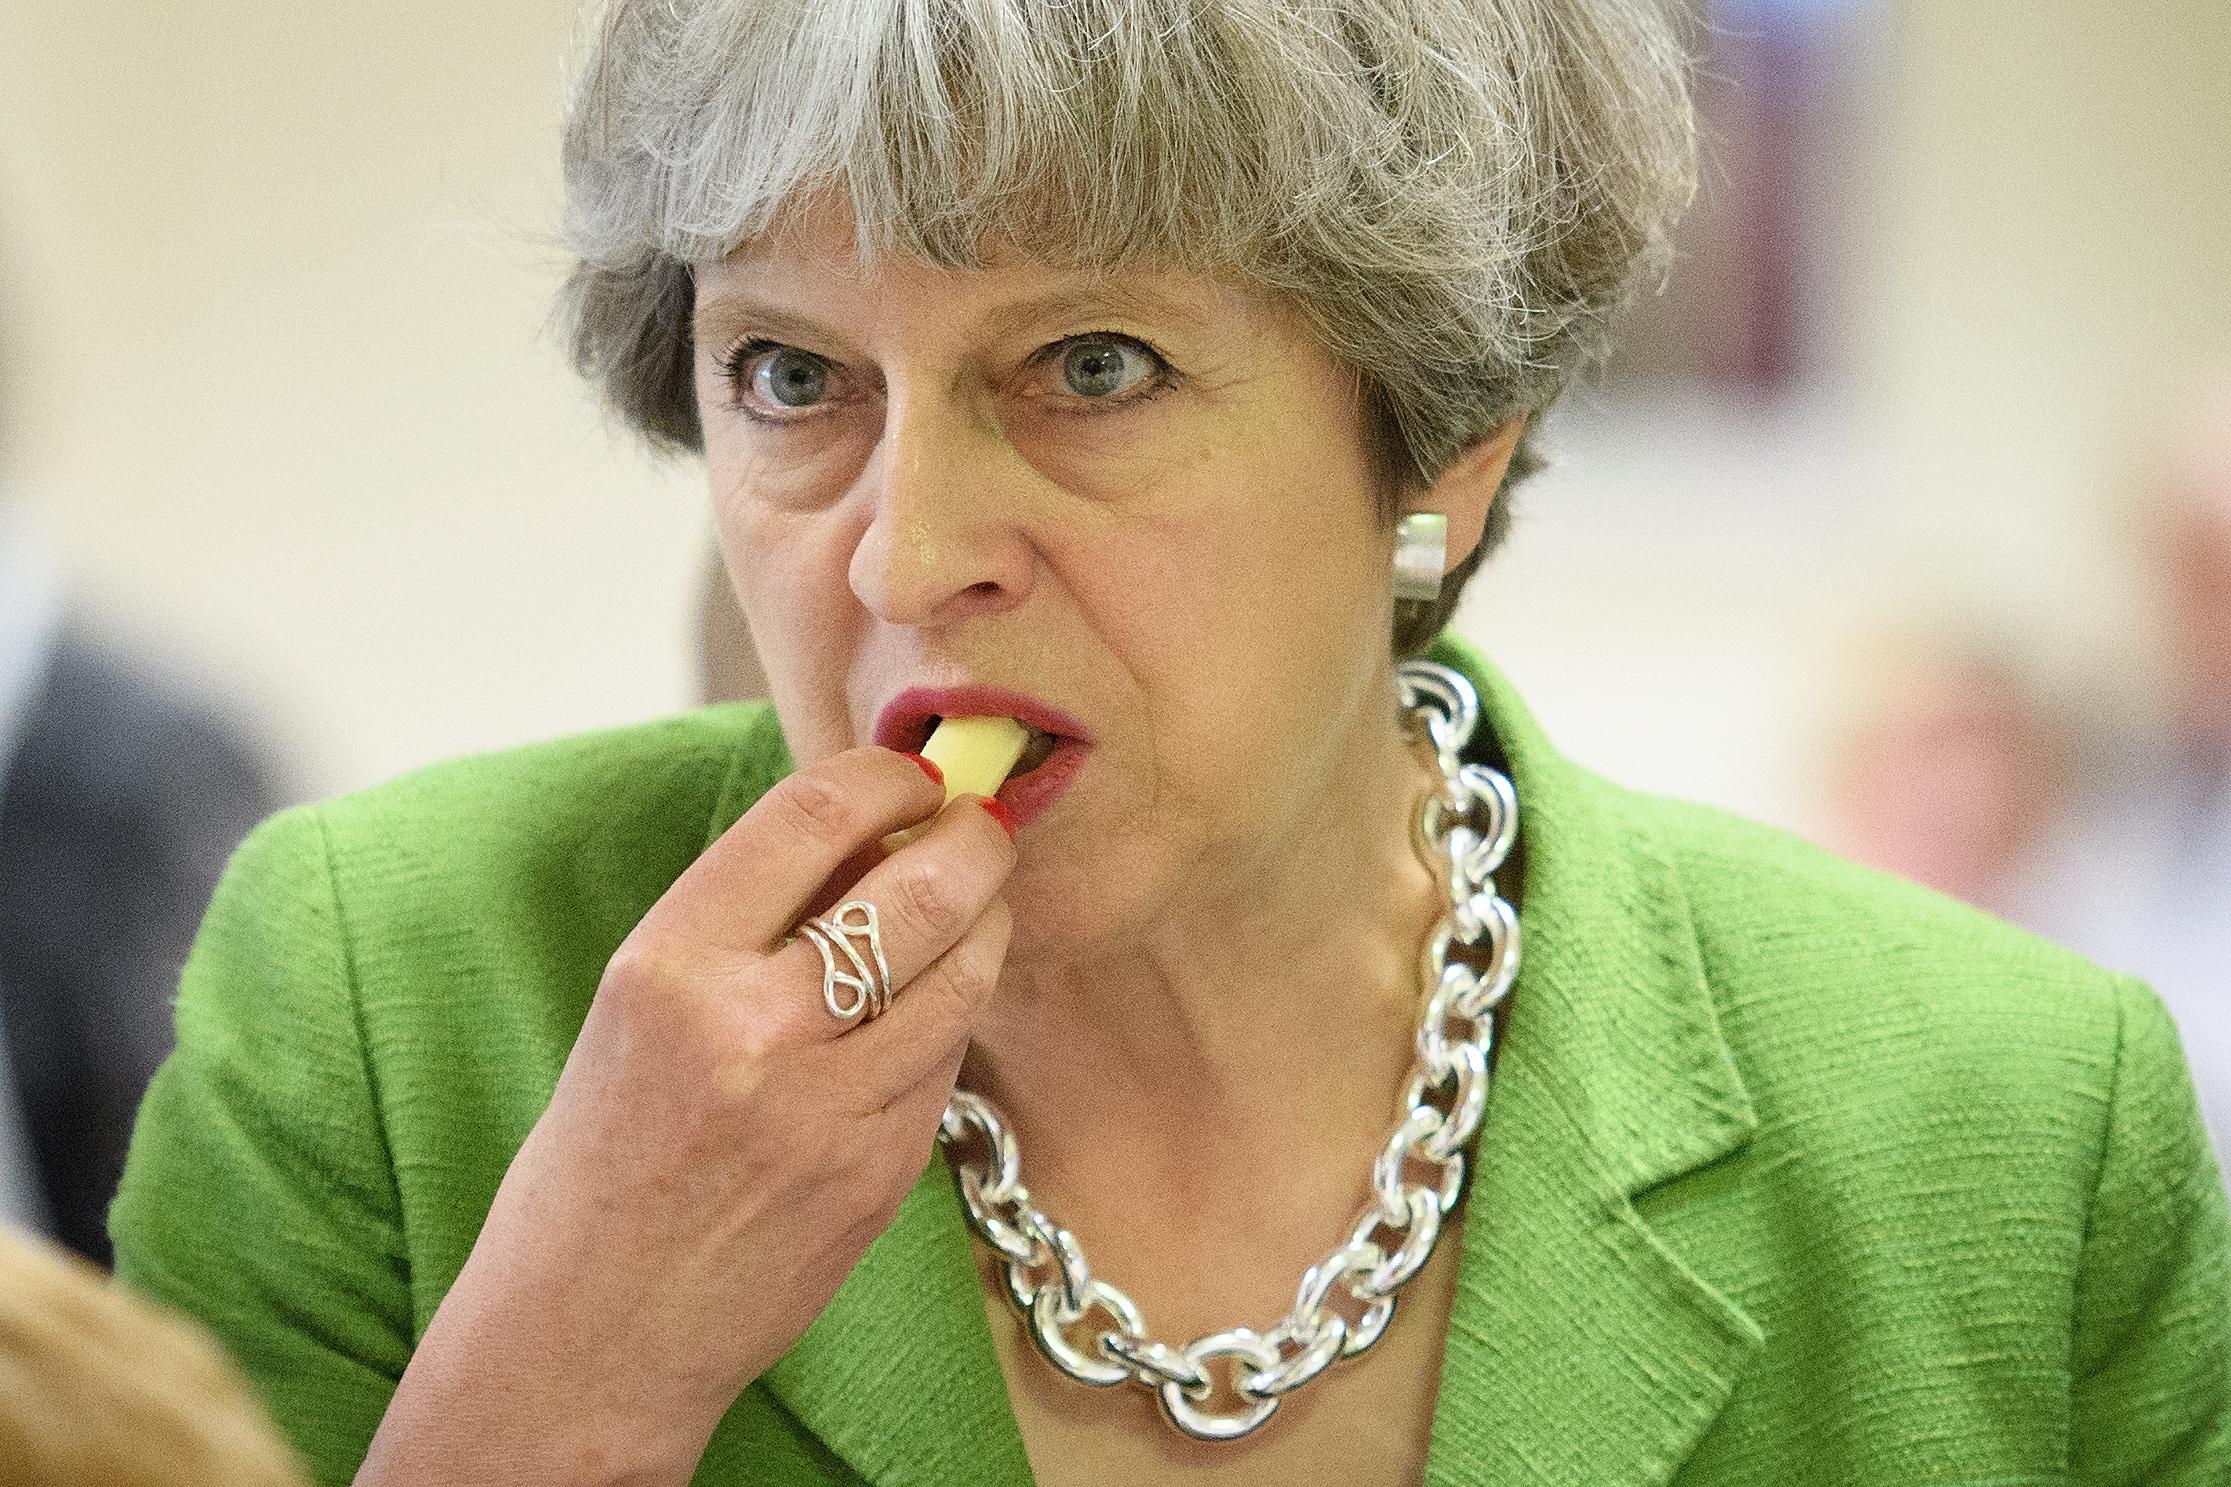 Eating chips awkwardly was one of the many moments of Theresa May's election campaign that became memorable for the wrong reasons